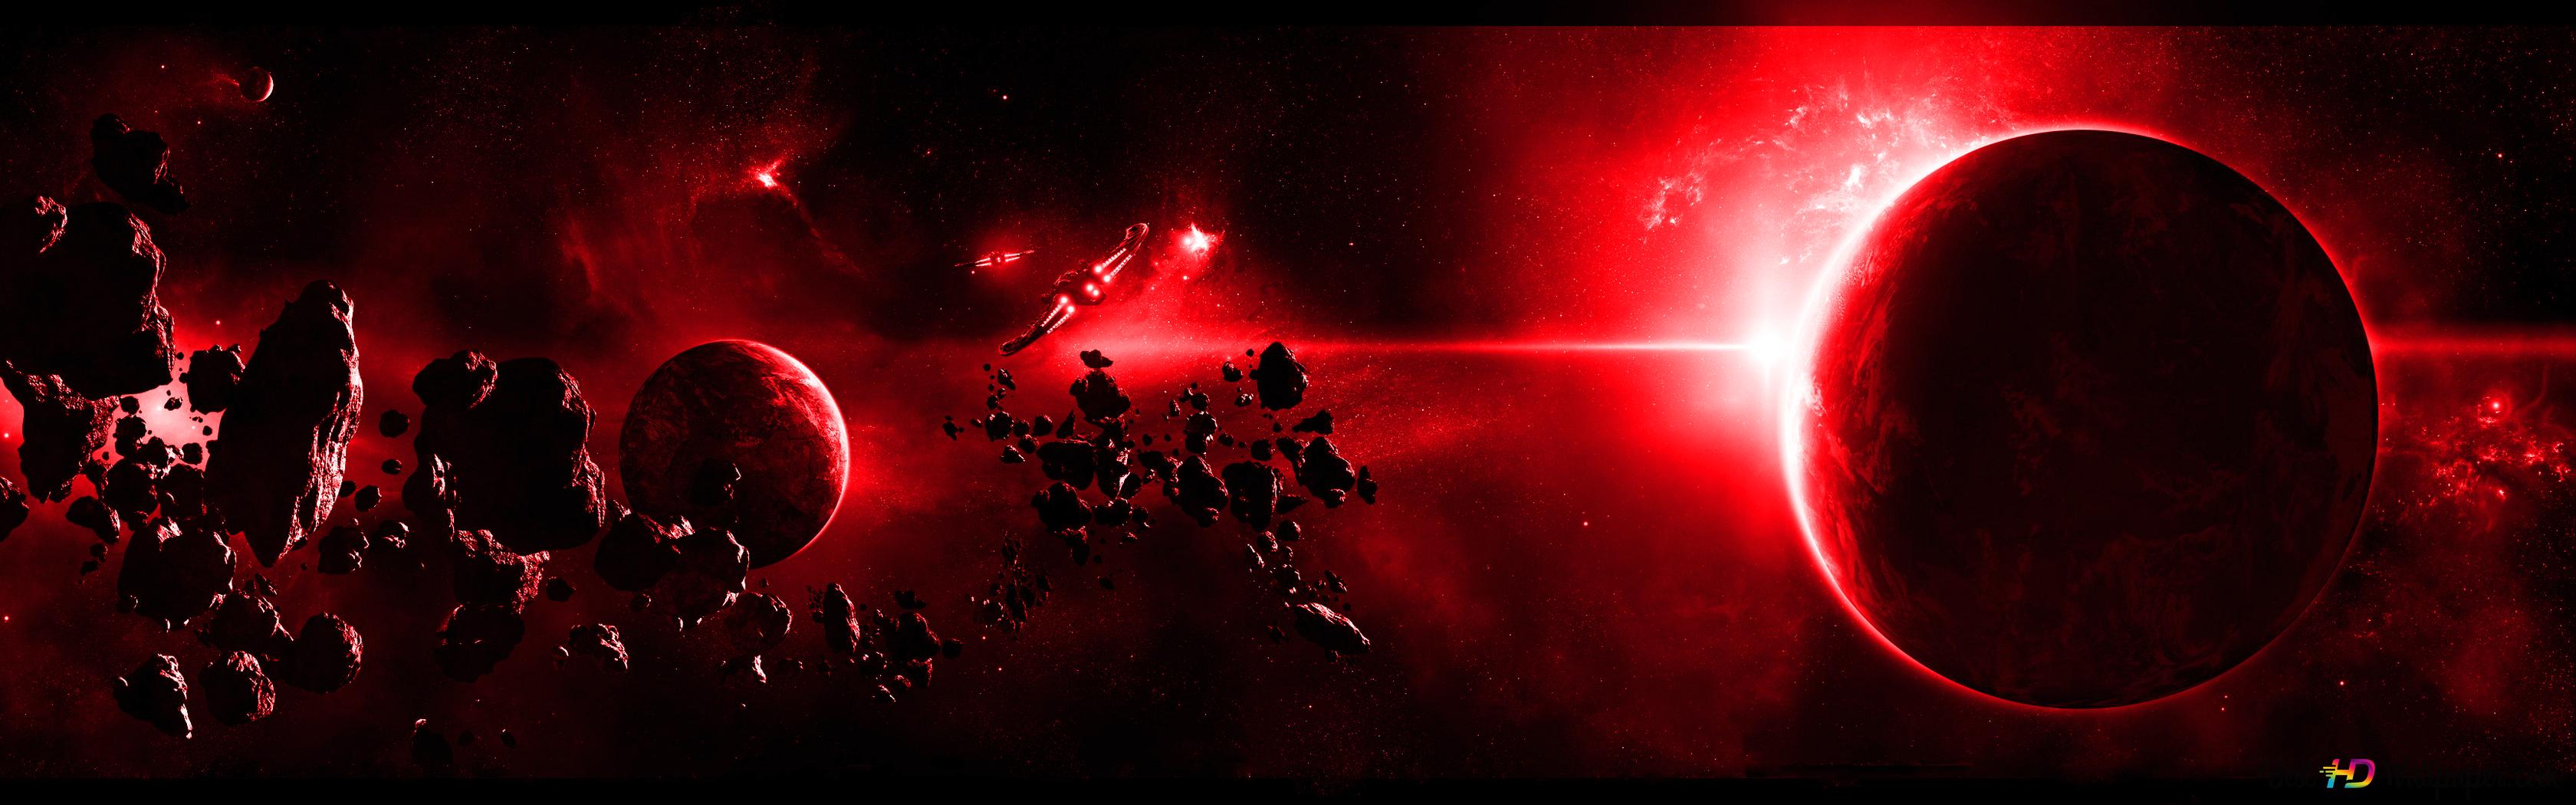 Planet red accent dual monitor 4K wallpaper download